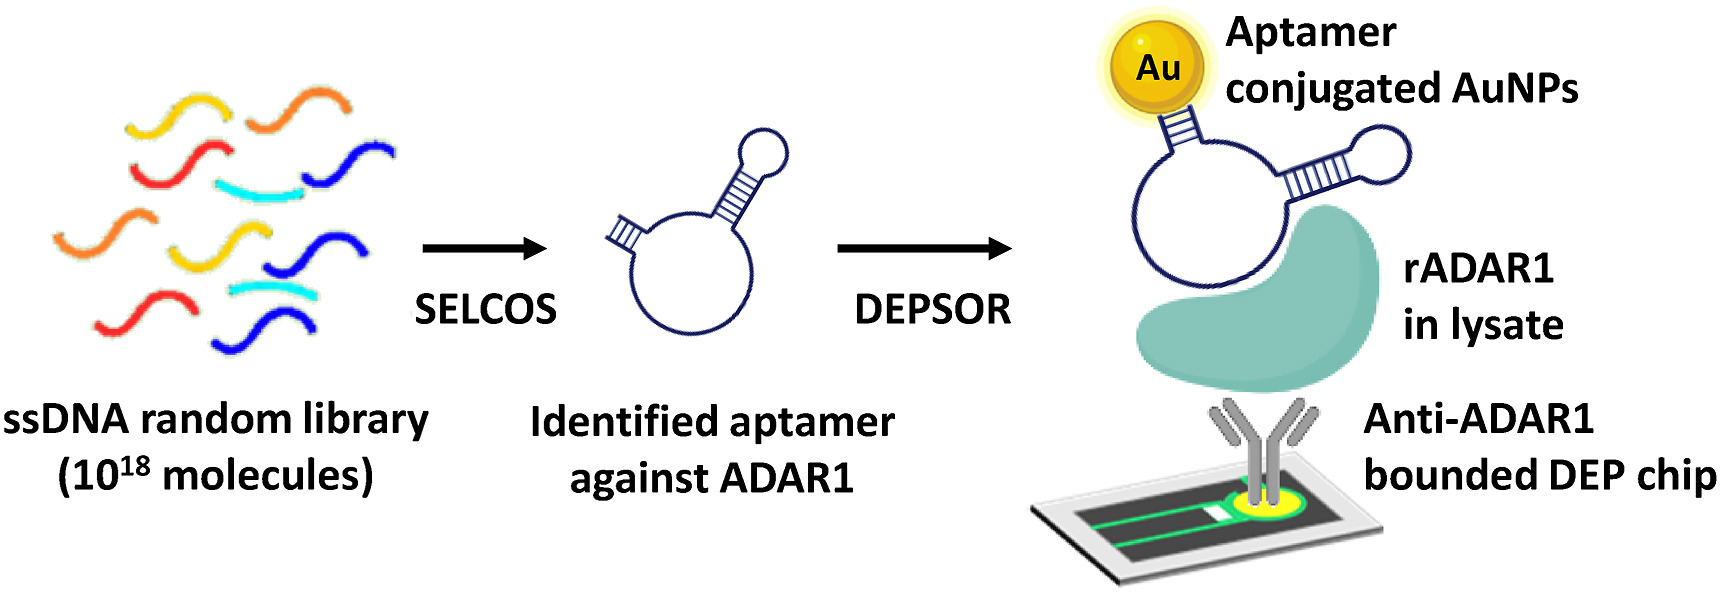 Pictorial representation of aptamer identification by systematic evaluation of ligands using competitive selection (SELCOS) method and application in the electrochemical determination of ADAR1 molecules in cell lysate